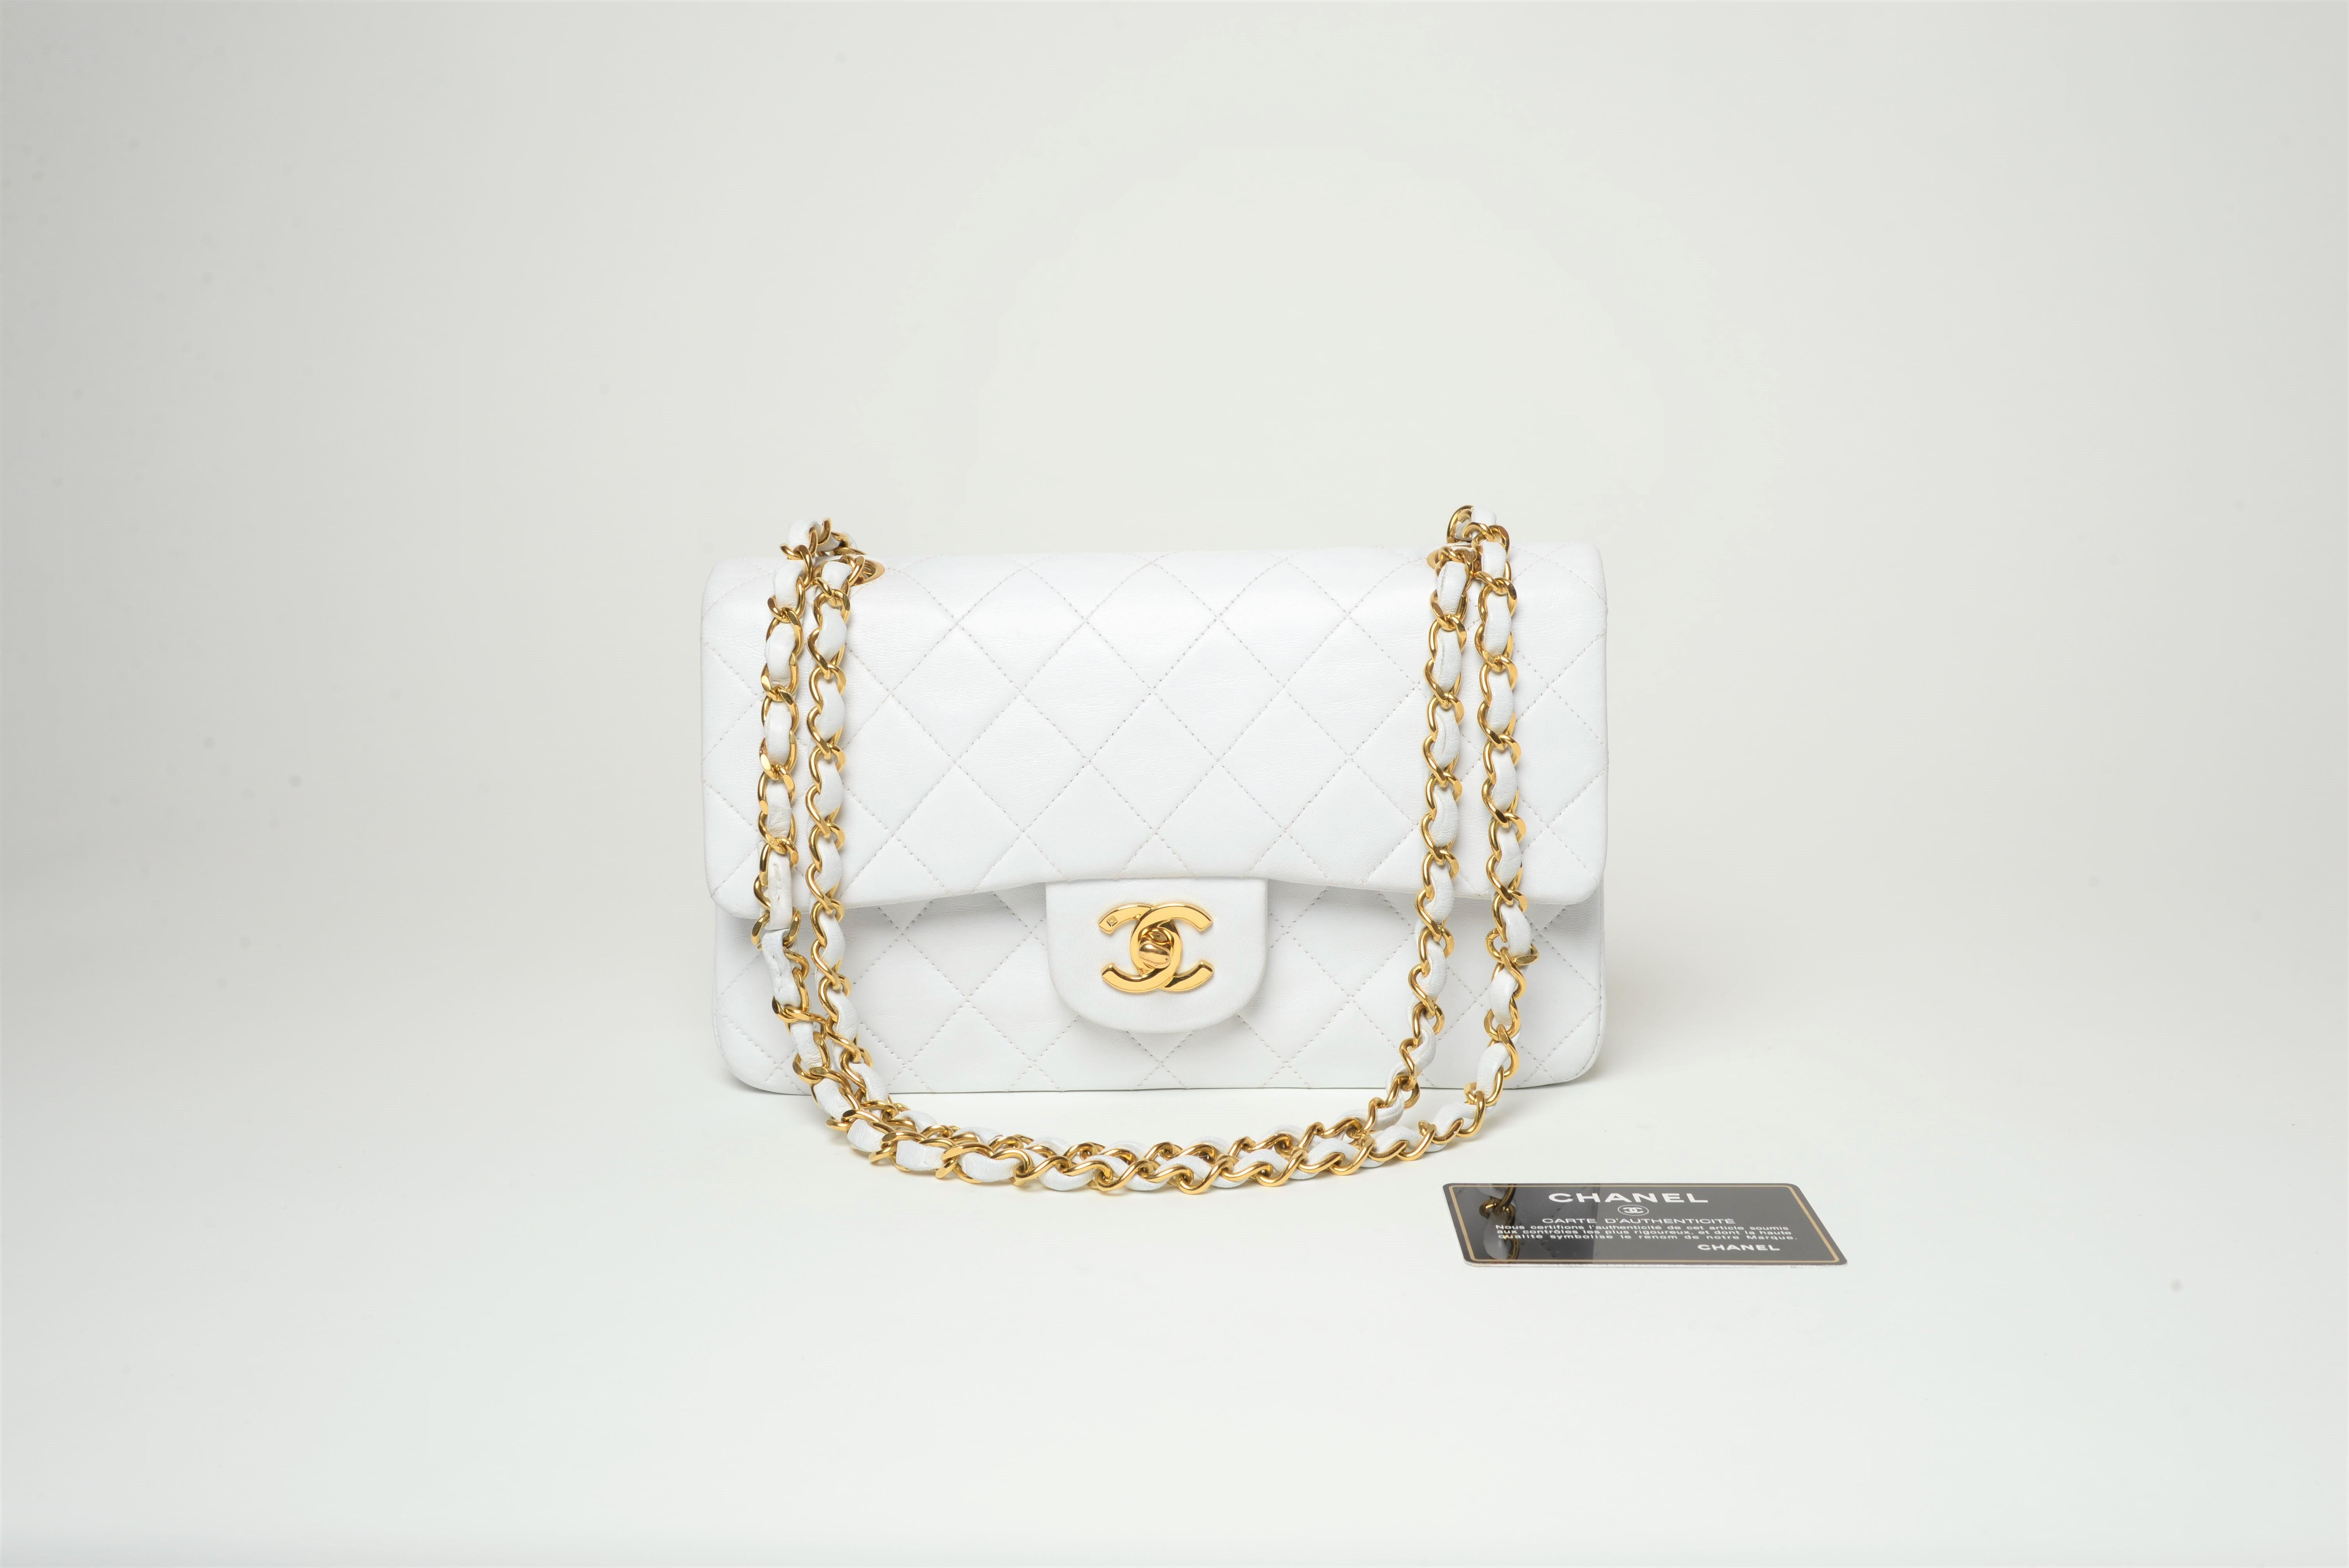 From the collection of SAVINETI we offer this Chanel Classic Flap:
-	Brand: Chanel
-	Model: Classic Double Flap White
-	Year: 1994-1996
-	Code: 3227970
-	Condition: Good
-	Materials: Lambskin leather, 24k gold-plated hardware
-	Extras: Chanel